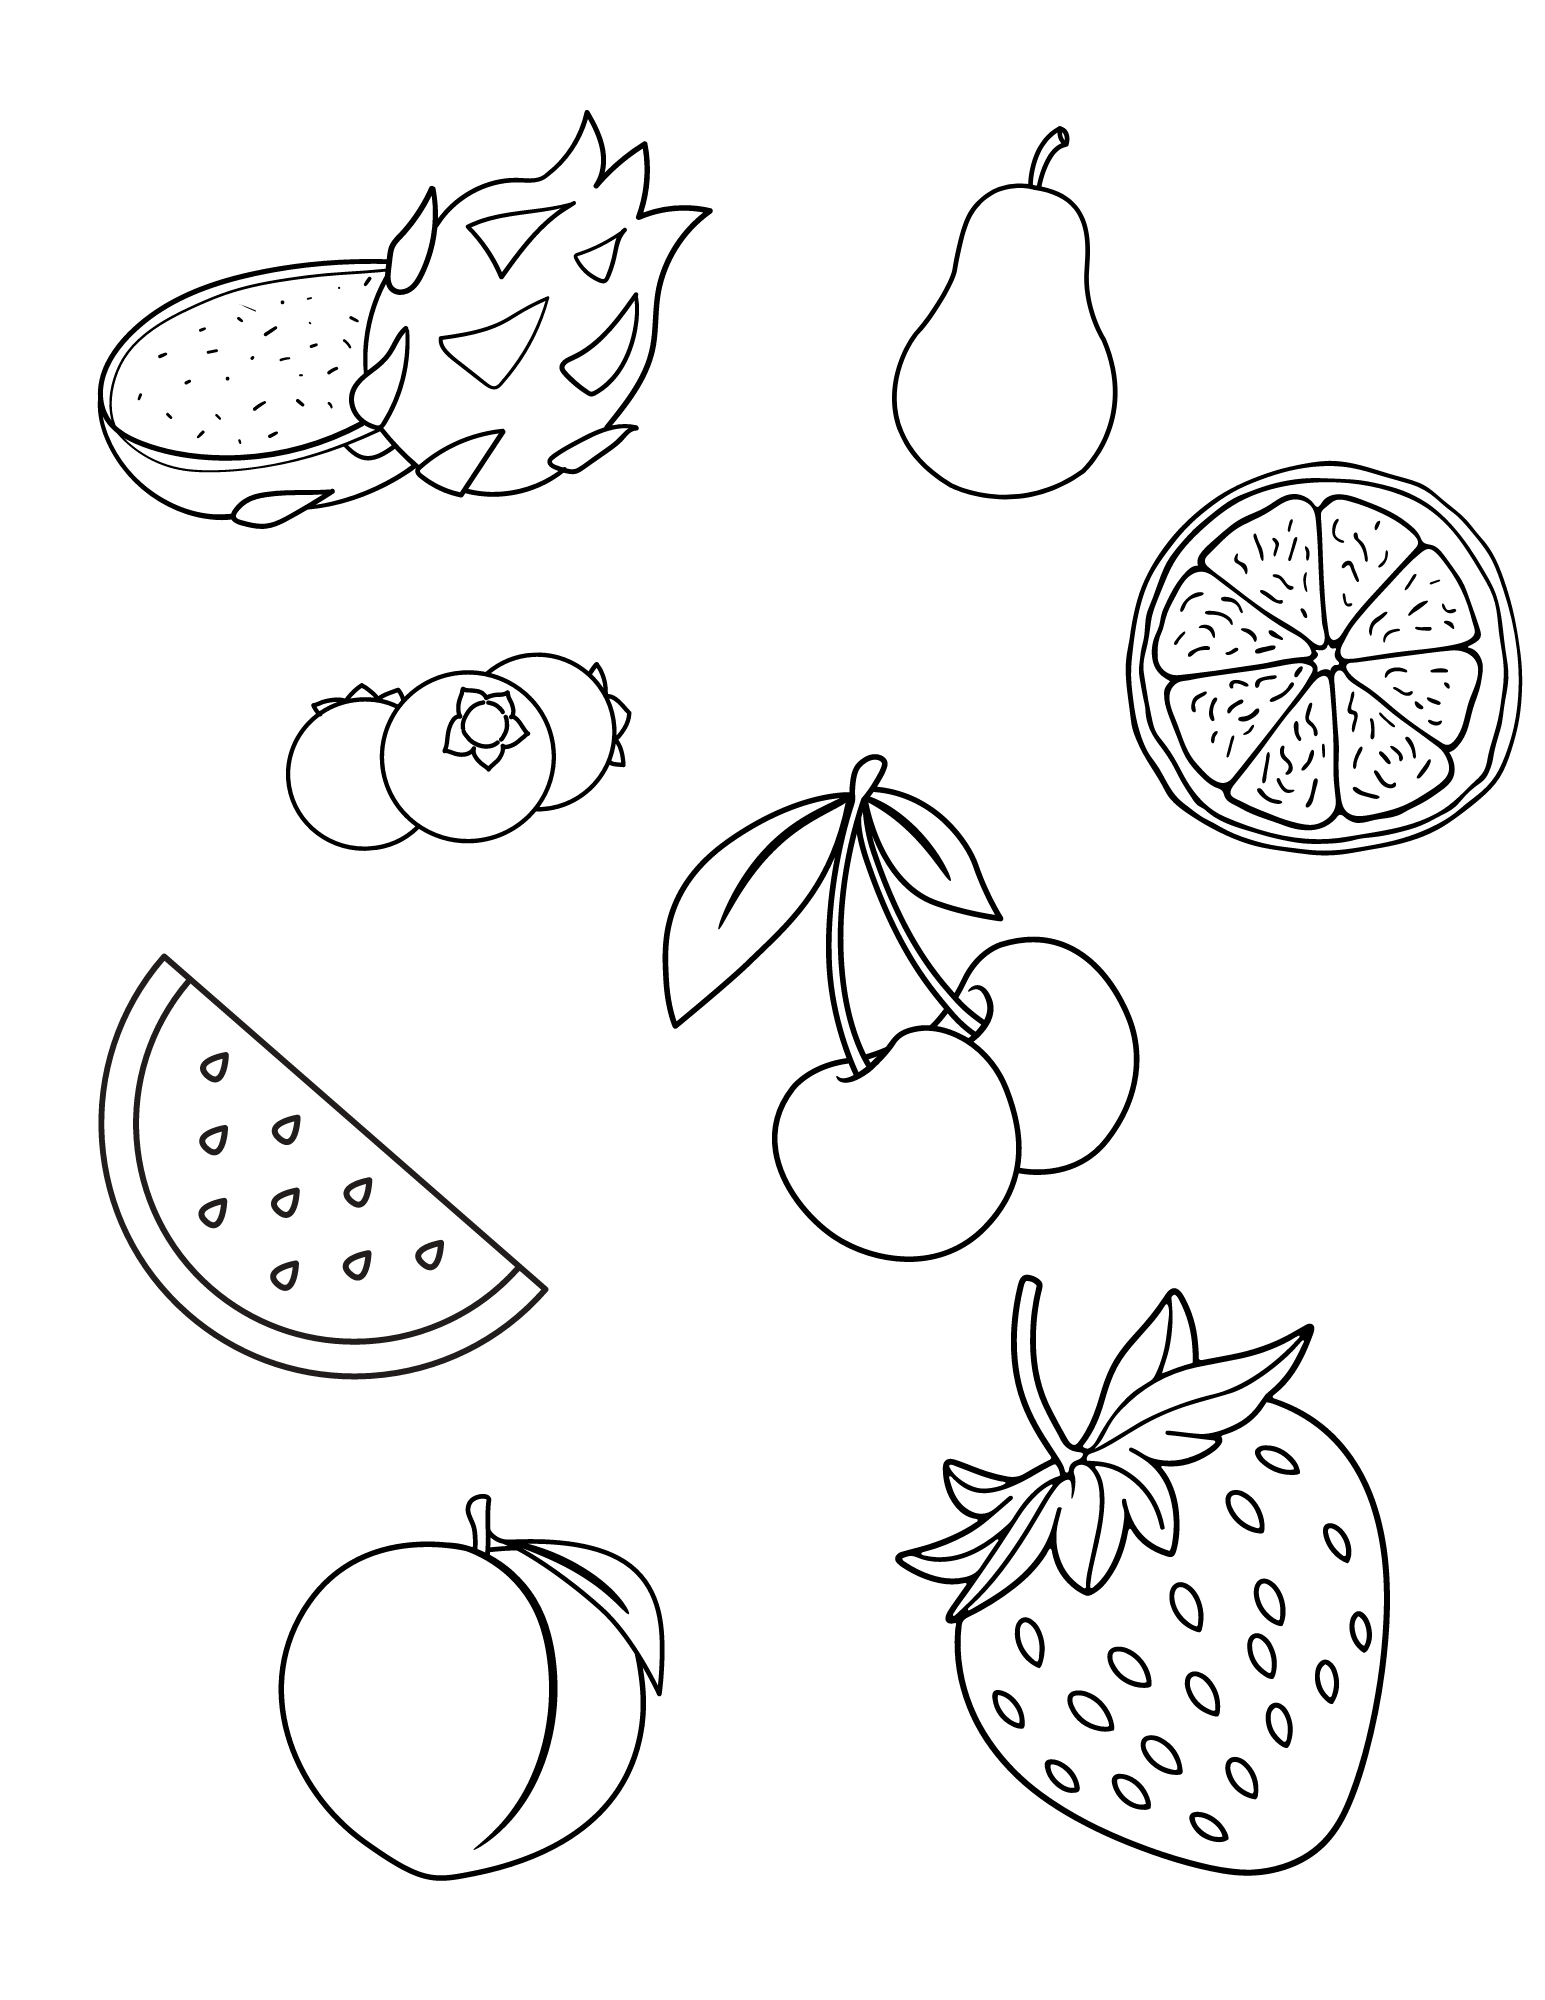 A coloring page of summer fruits.